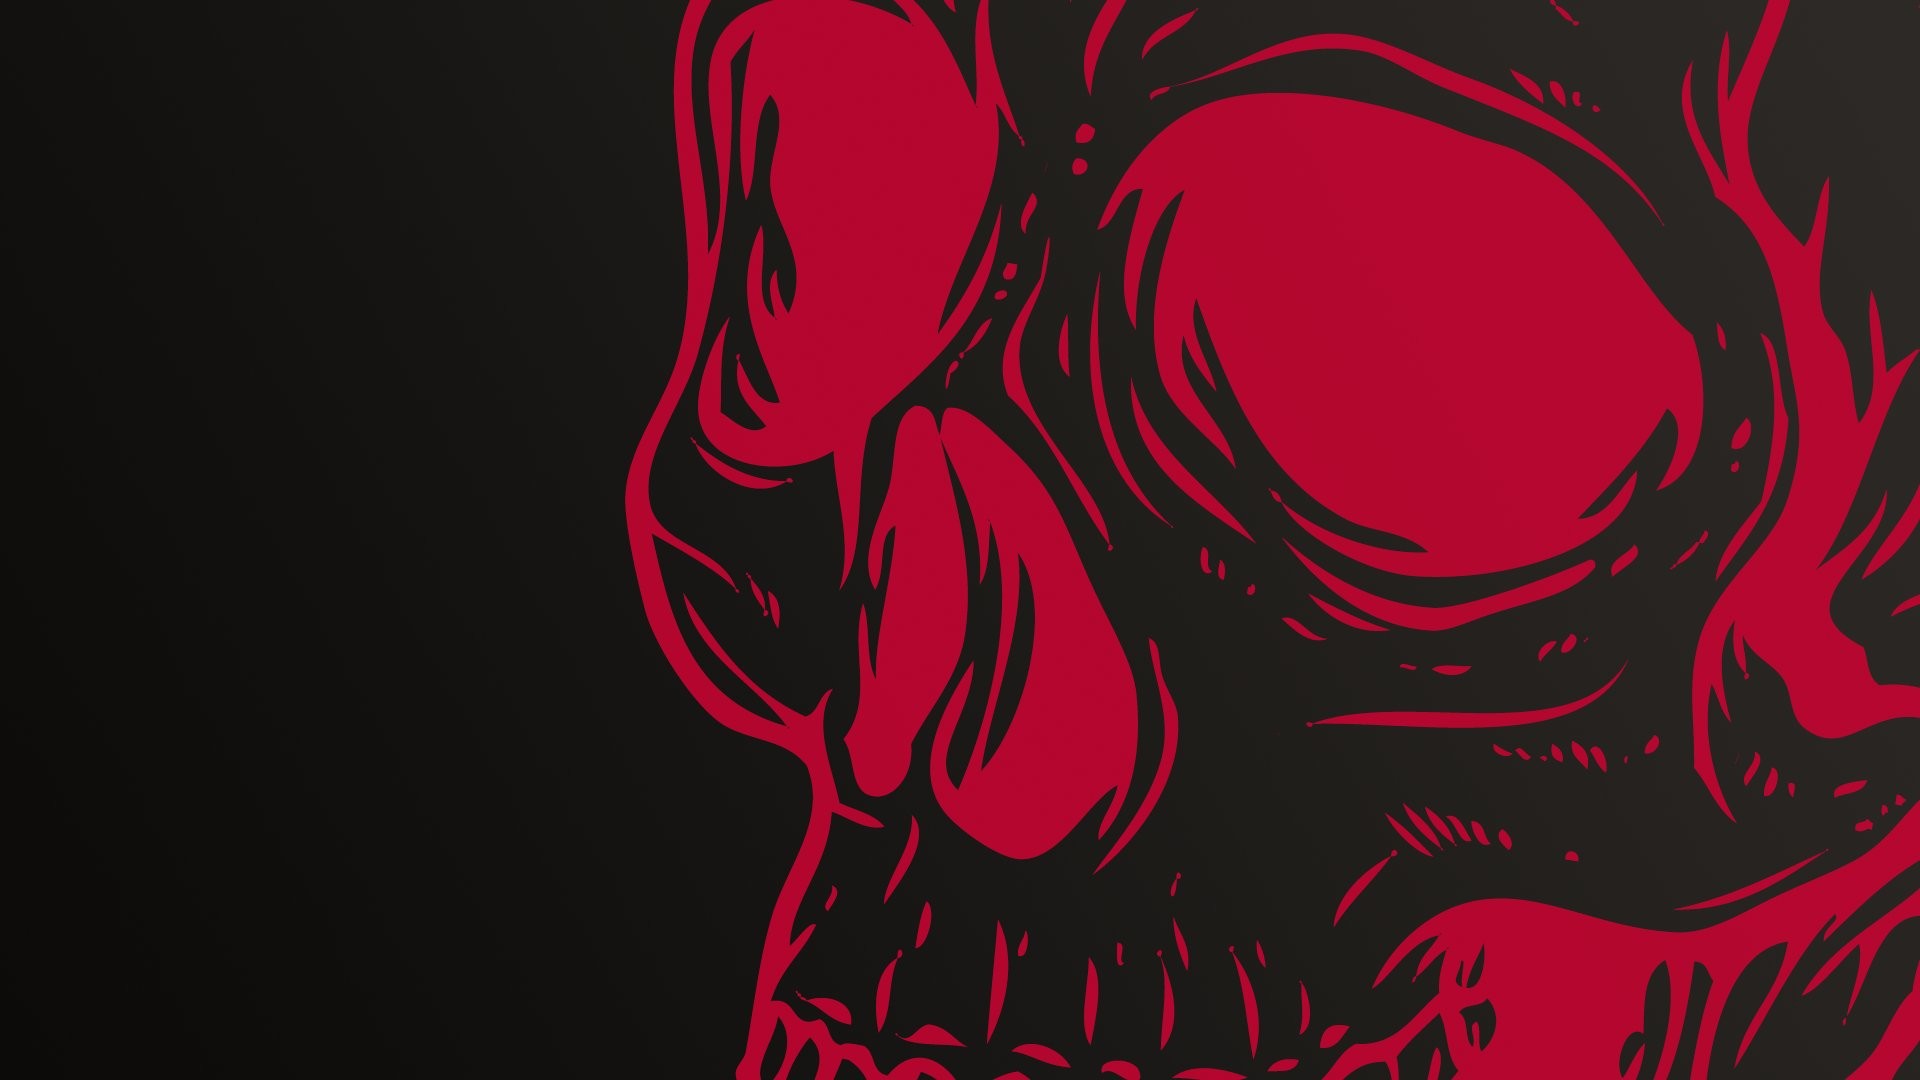 Abstract Skull Wallpapers Wallpaper Red And Black Skull Wallpapers  Wallpapers)